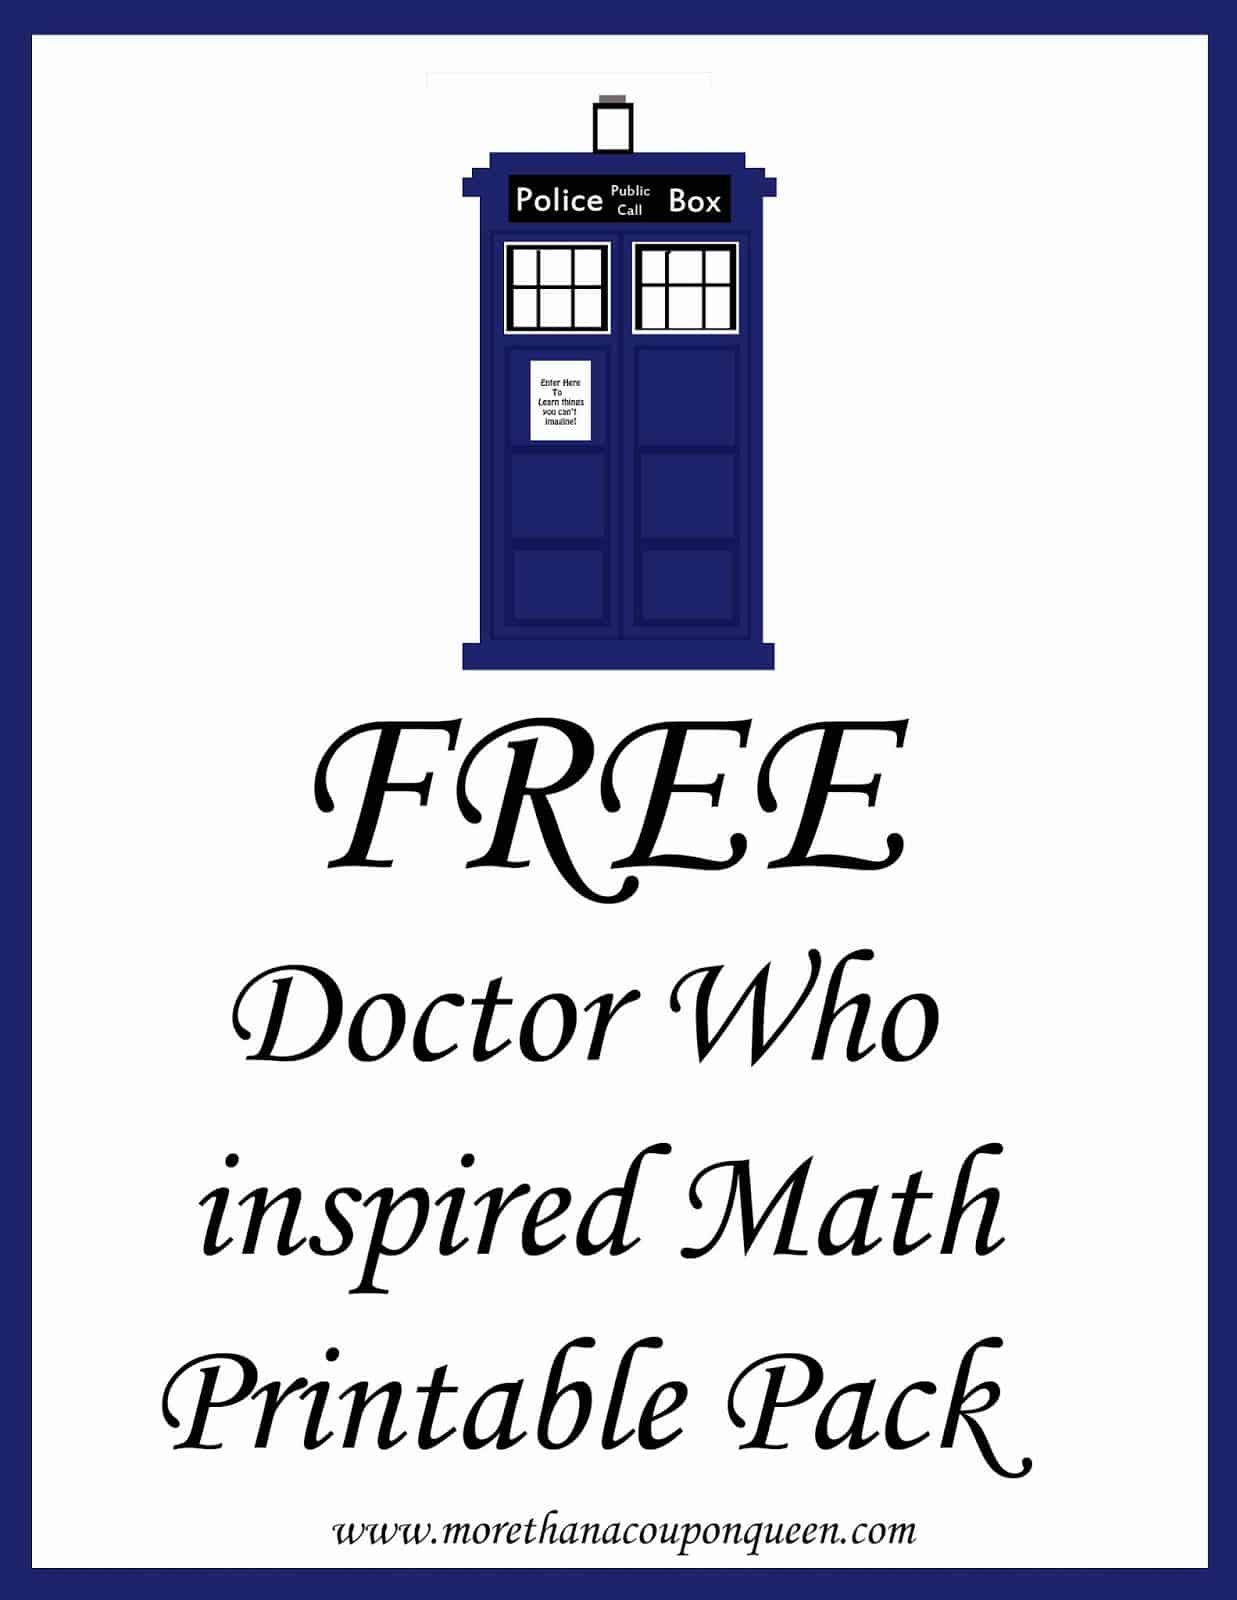 Free Doctor Who Inspired Math Printable Pack